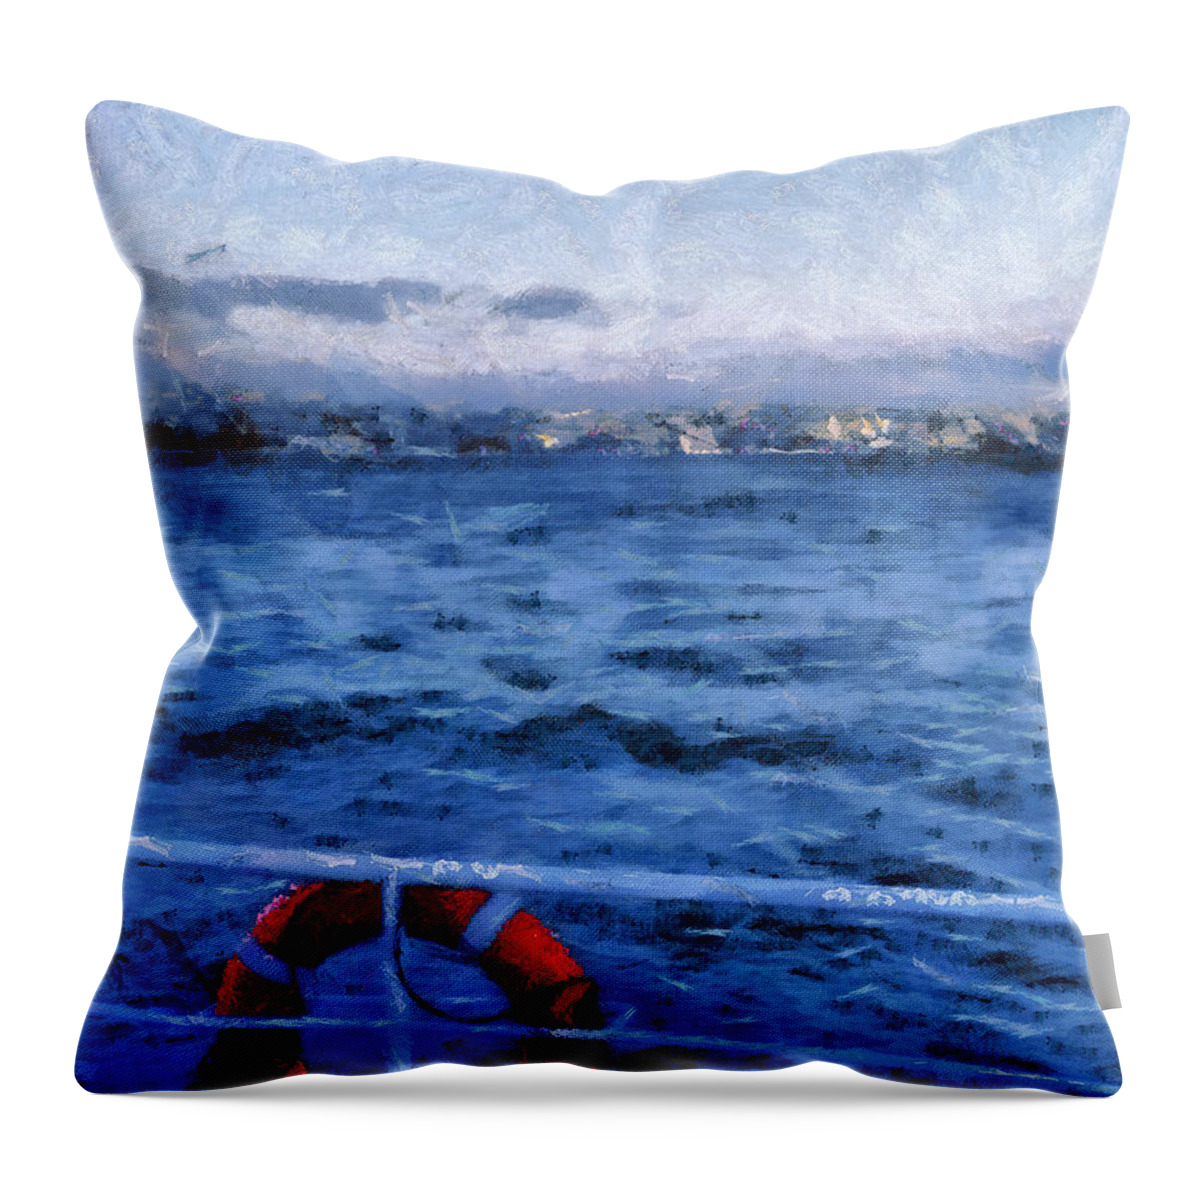 Painting Throw Pillow featuring the painting Seascape by Dimitar Hristov